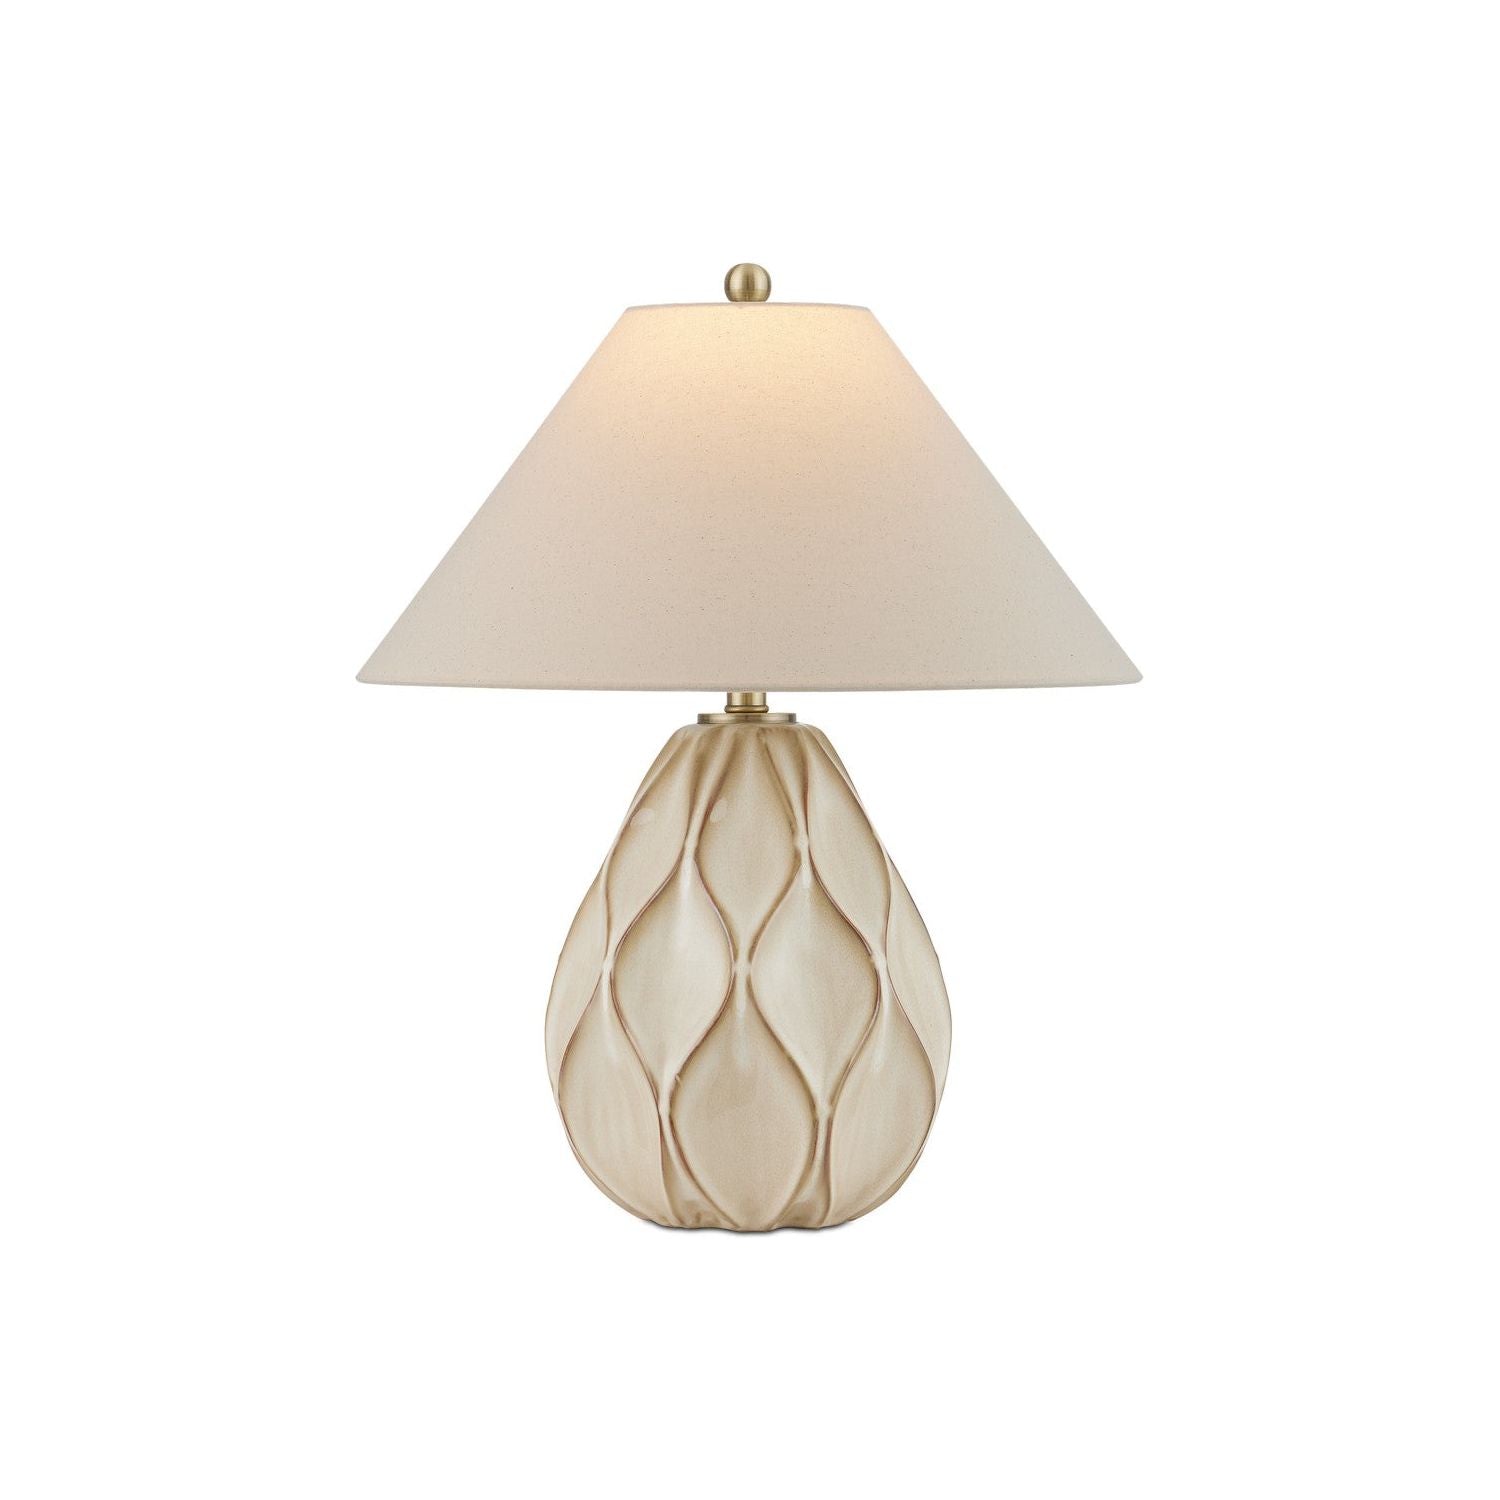 Currey and Company - 6000-0941 - One Light Table Lamp - Beige/Dark Brown/Light Antique Brass